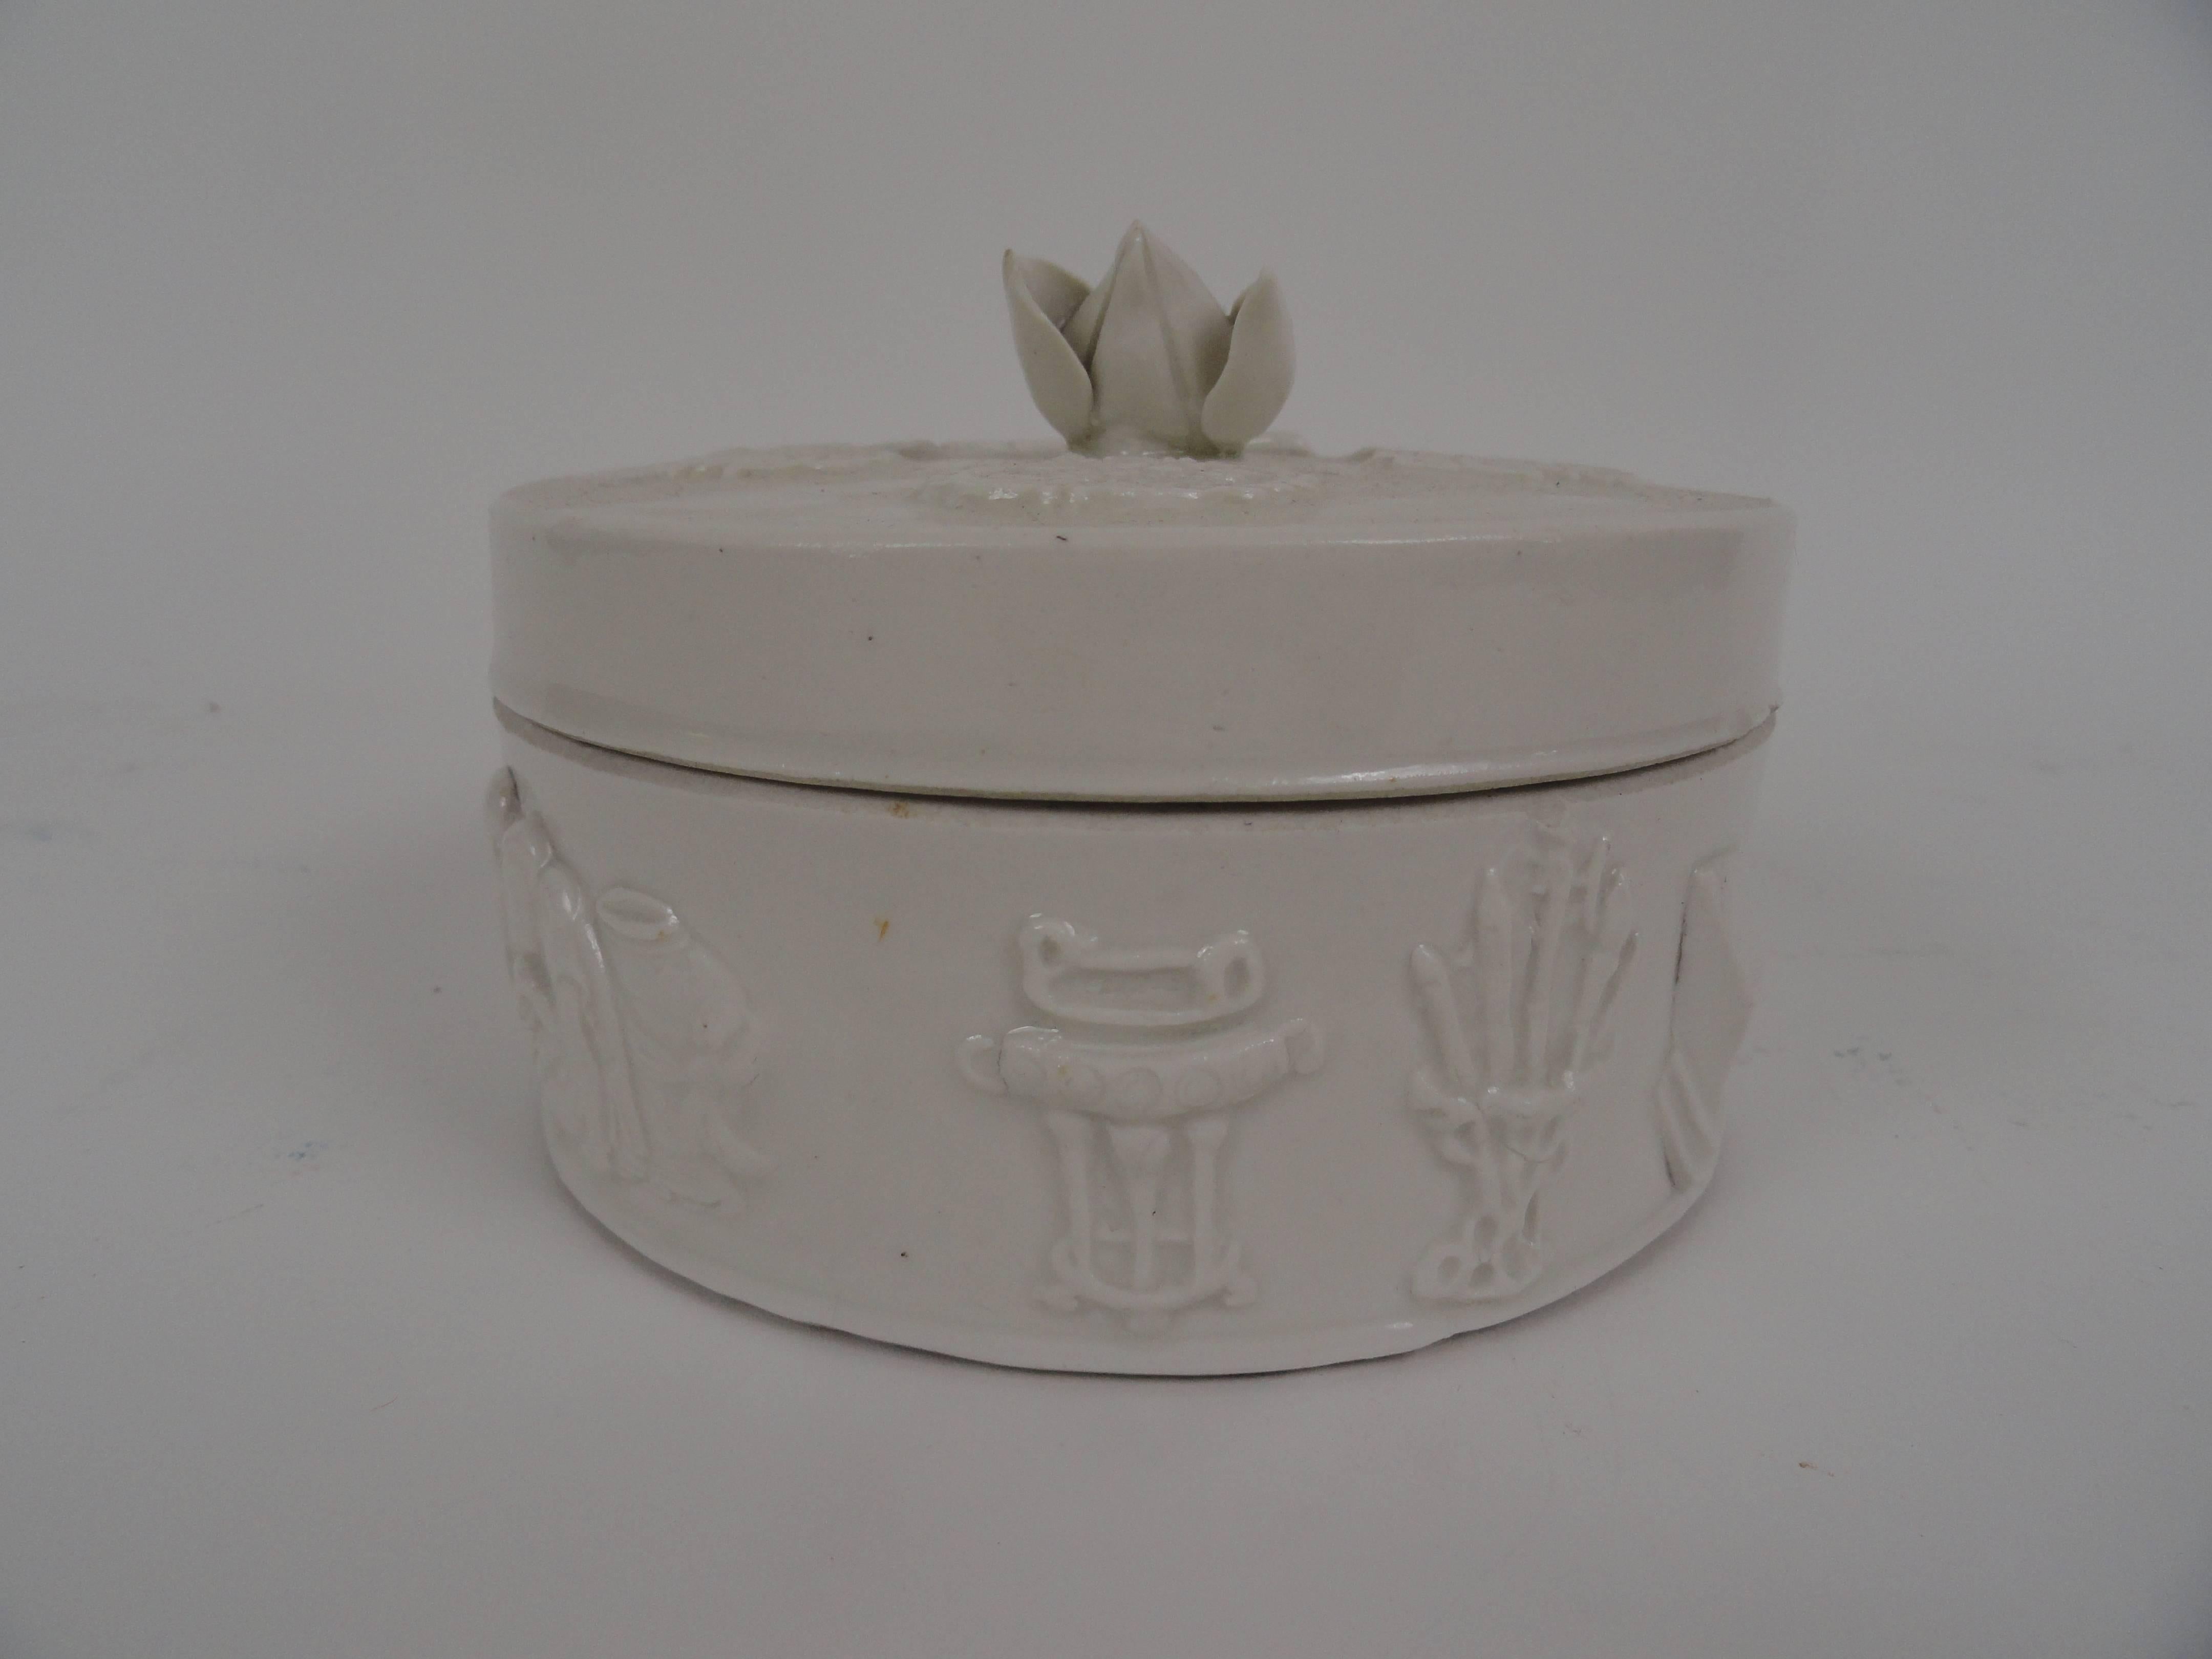 20th century, Chinese round ceramic box with removable lid which has a lotus flower on top. Stamped 